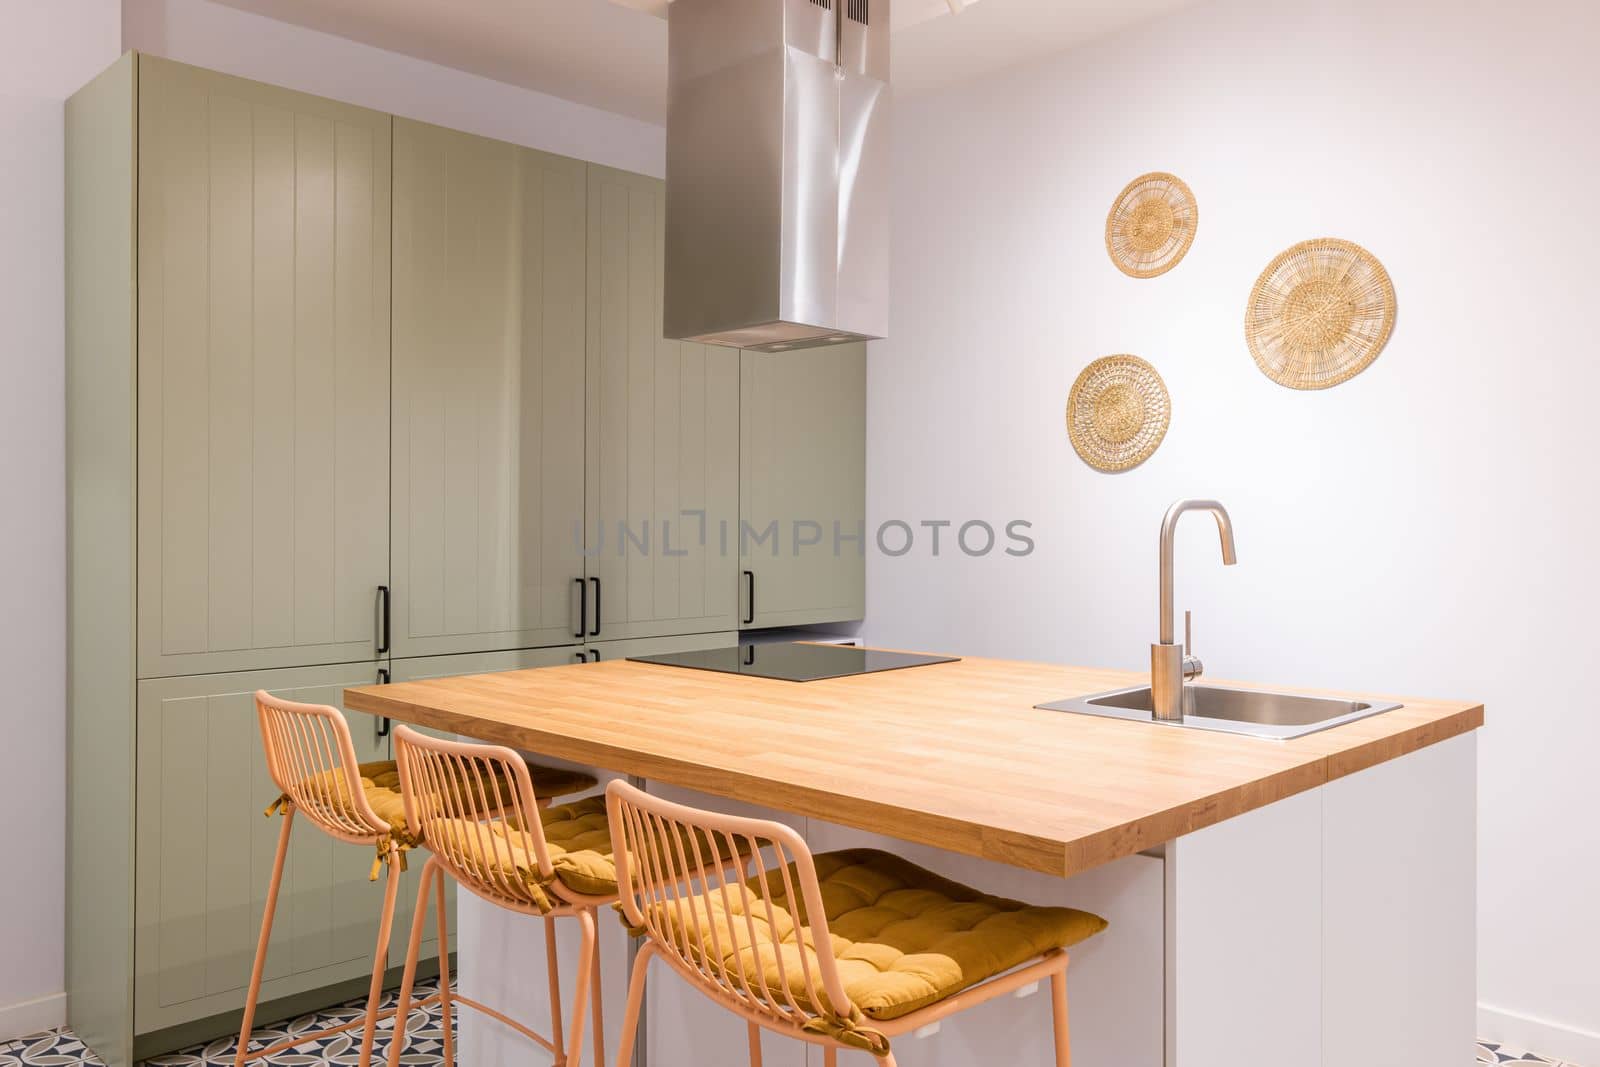 Closeup of kitchen table with trendy design high chairs. Wooden top and chairs in single honey color palette. Countertop has built-in sink and ceramic plate above which exhaust system is located. by apavlin